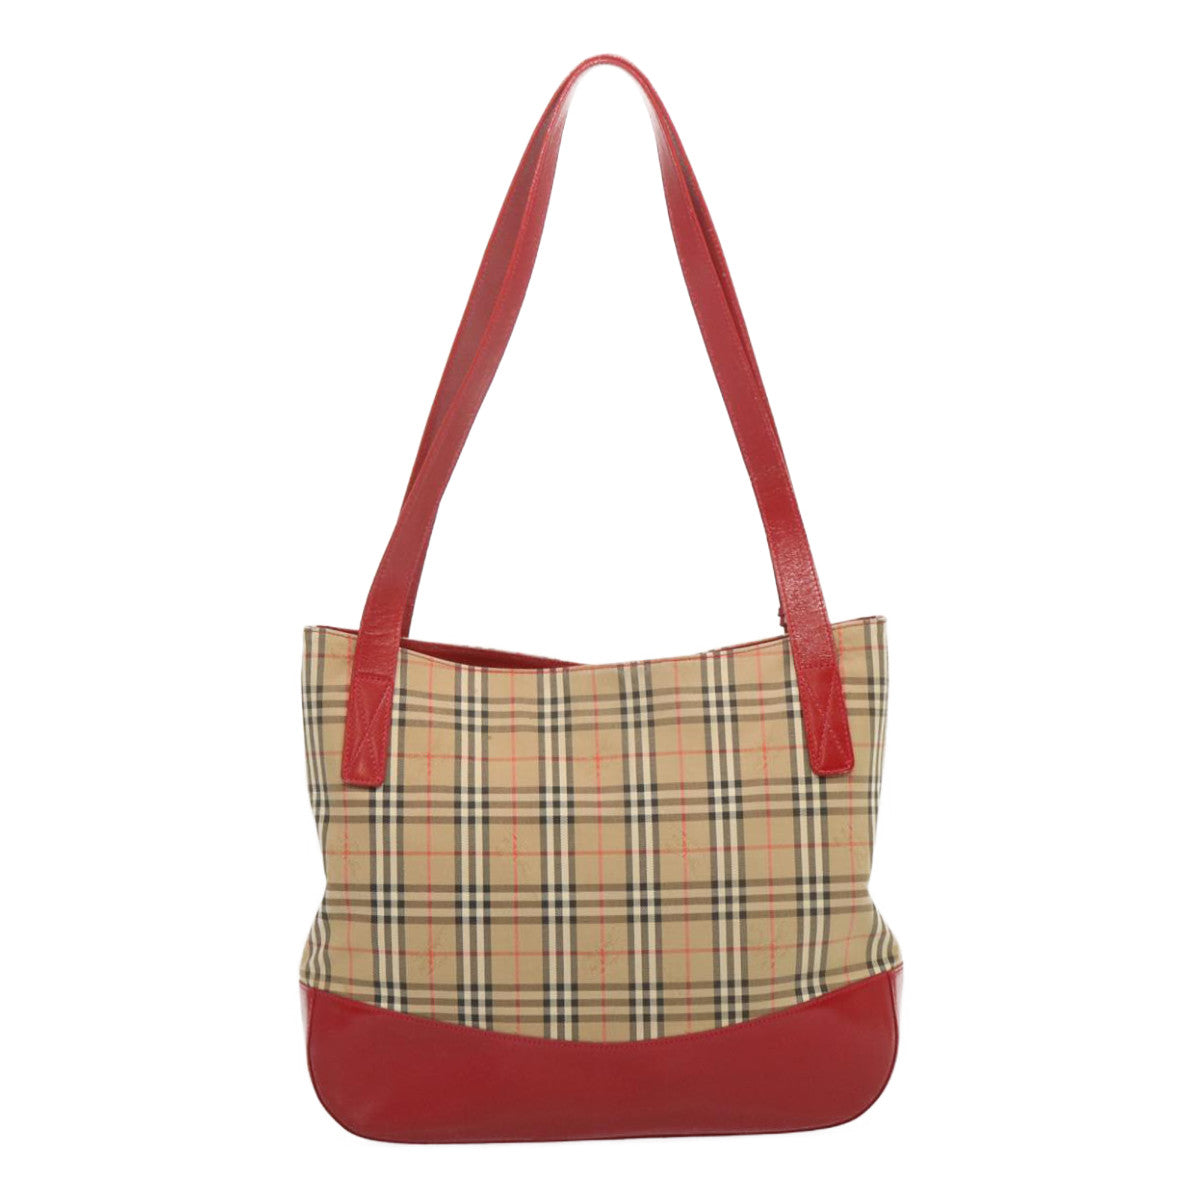 Burberrys Nova Check Tote Bag Canvas Beige Red Auth 67775